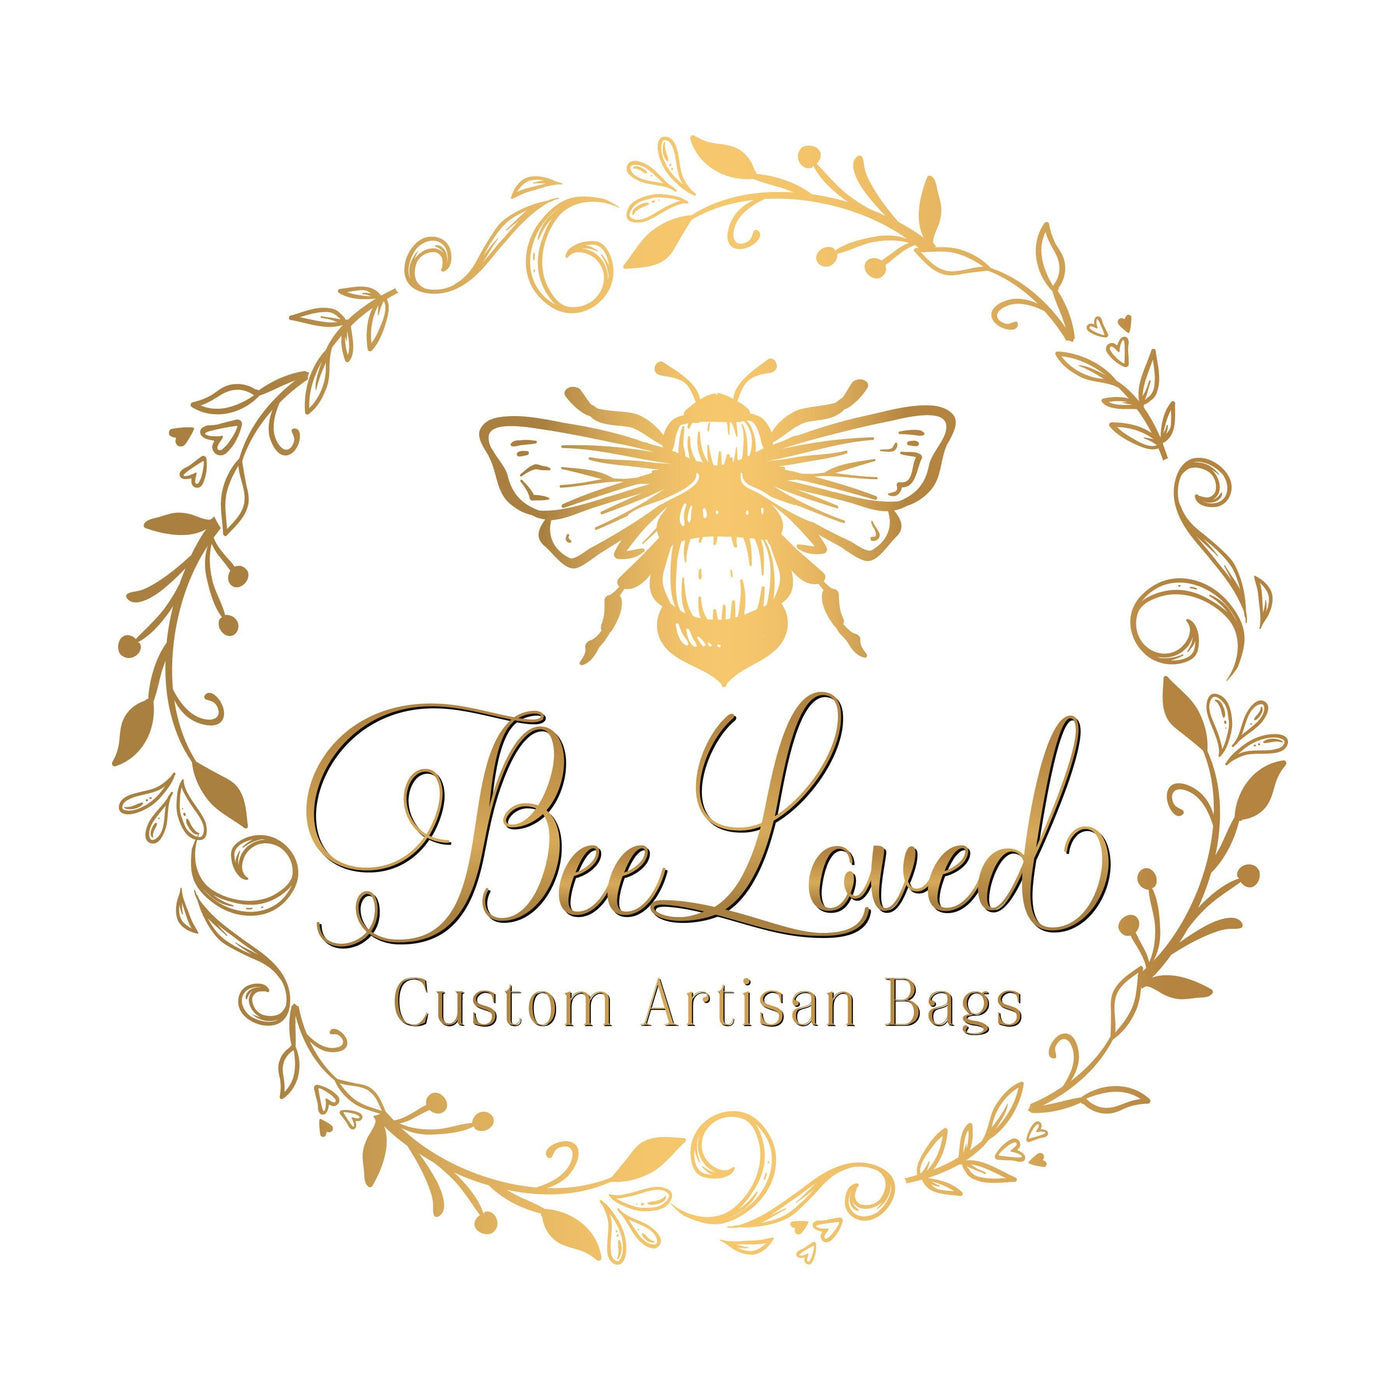 BeeLoved Custom Artisan Bags and Gifts Gift Cards $25.00 Share the Love BeeLoved Gift Card